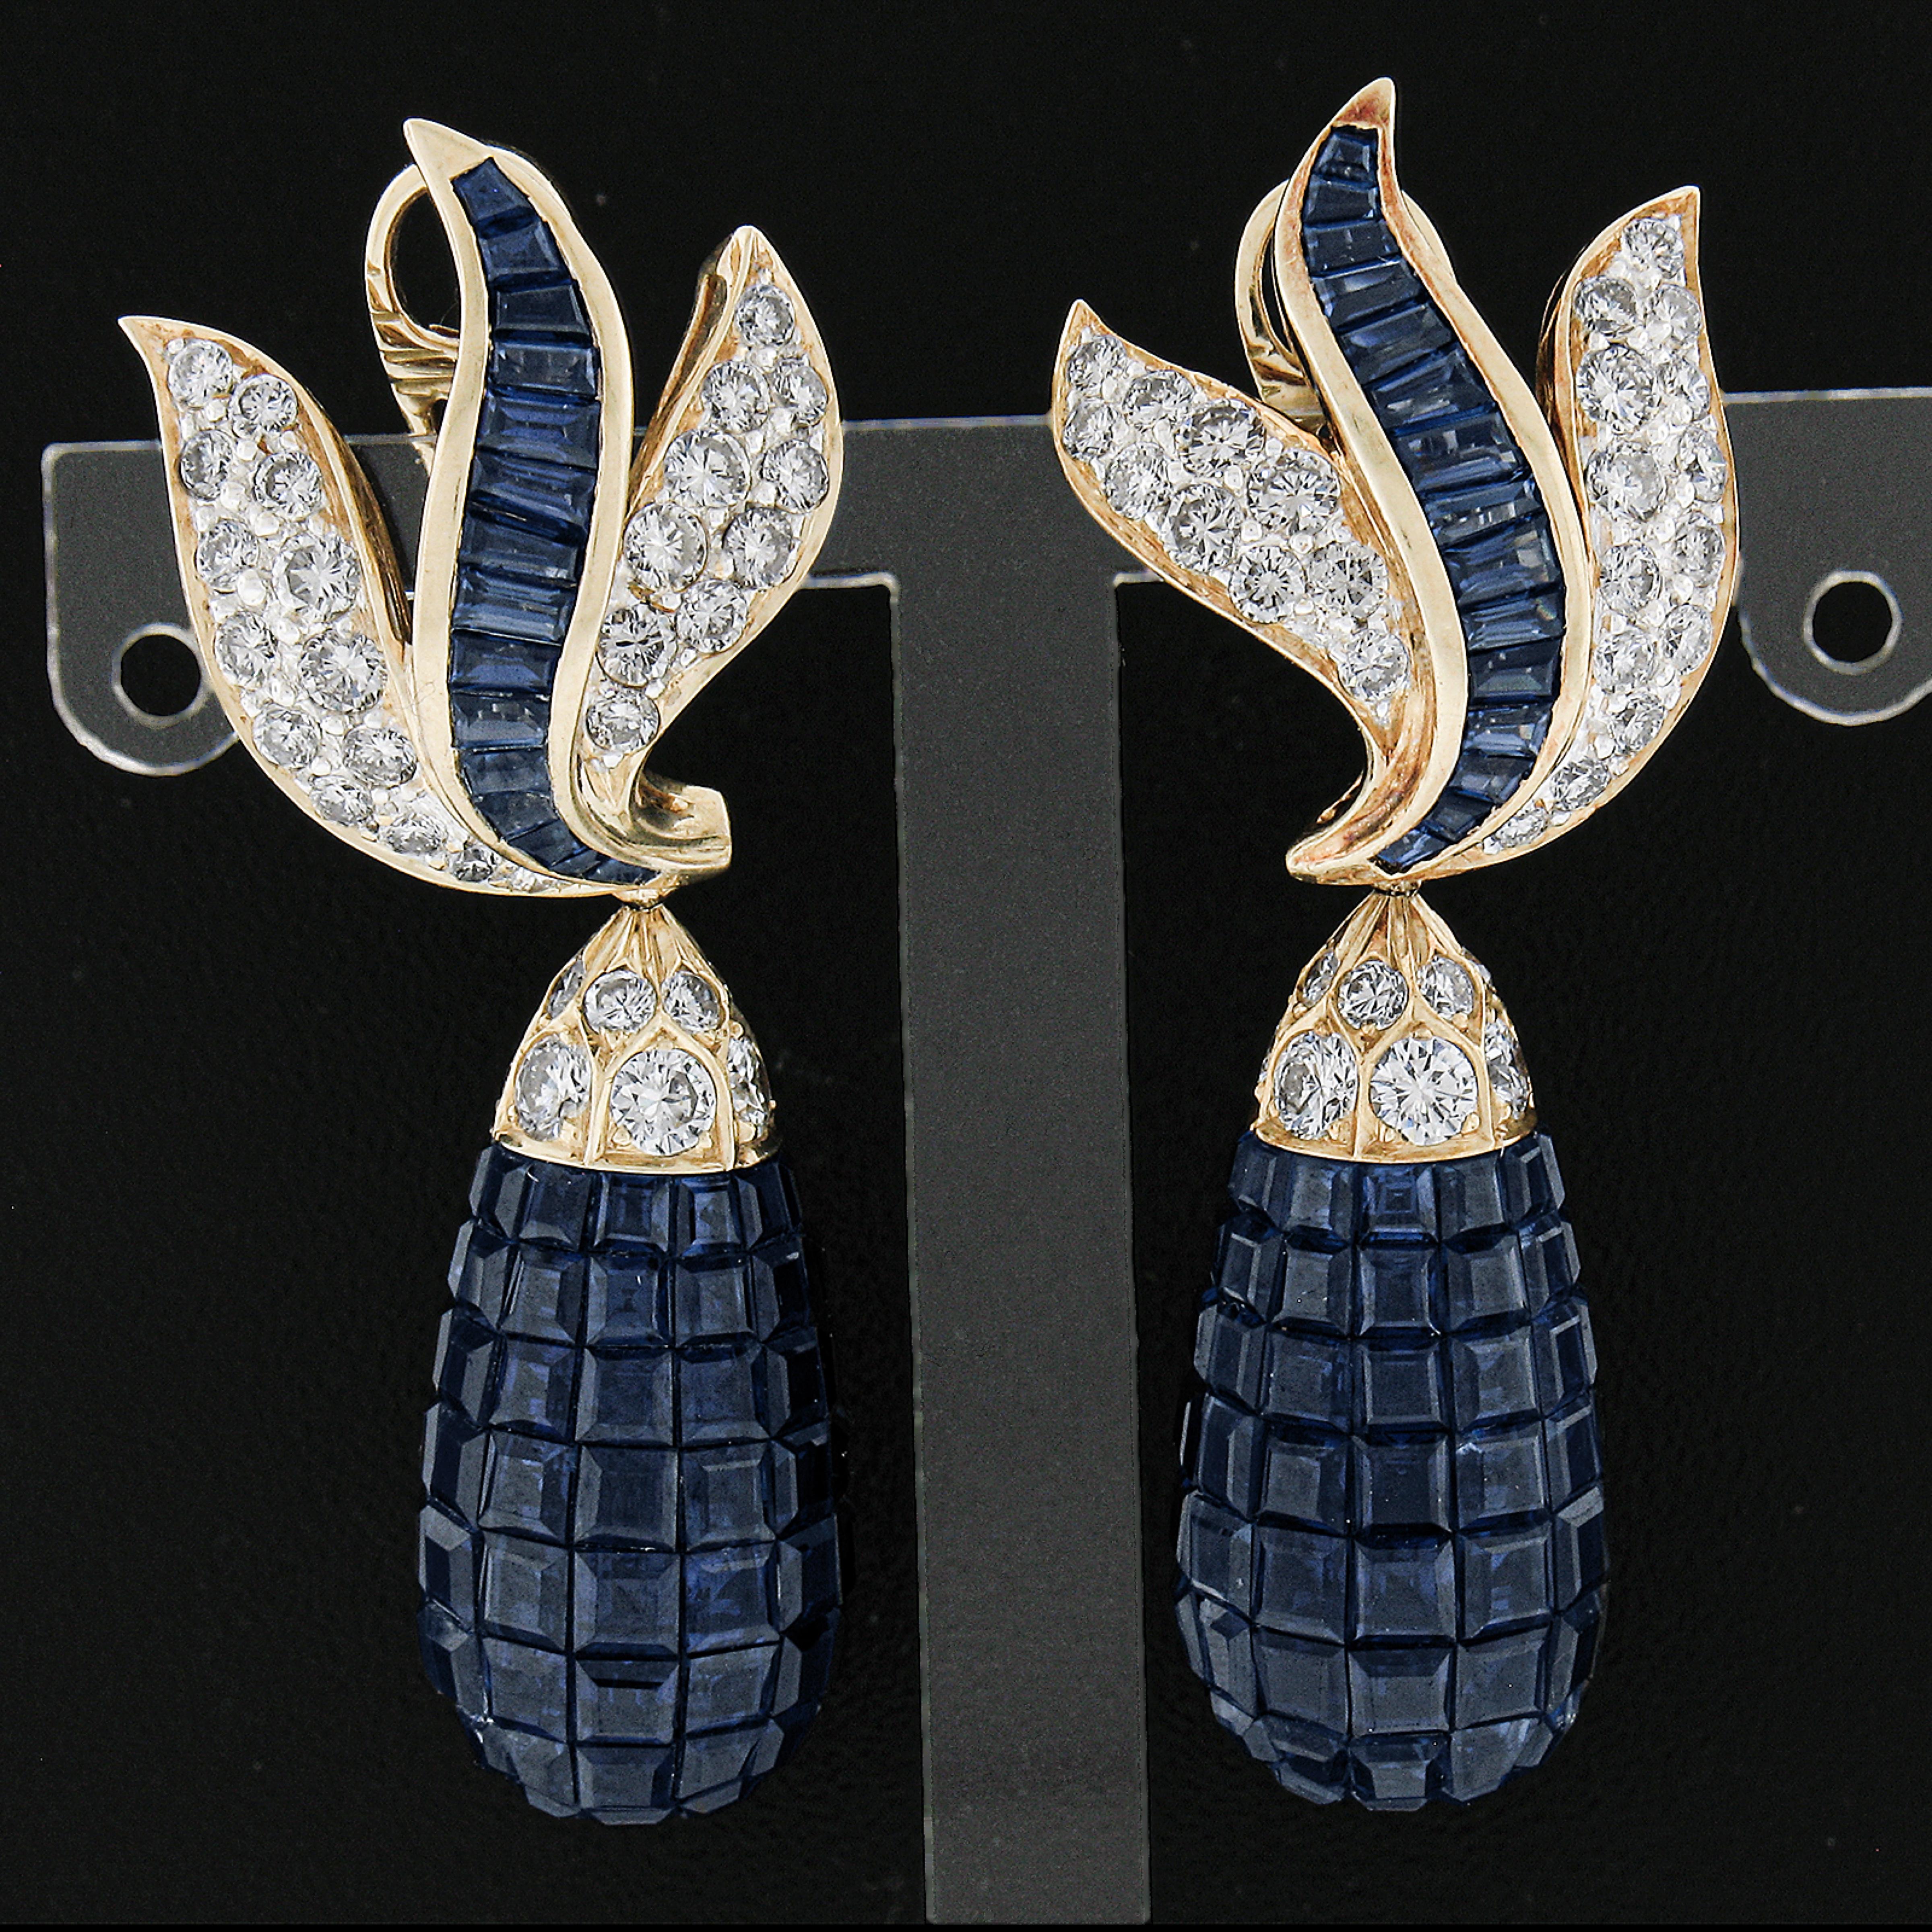 These magnificent dangle Day/Night earrings feature flame style tops with channel baguette sapphires and fiery pave diamonds. The optional drops are 3D tear drops covered in calibre cut invisible set sapphires - one of the most difficult feats in